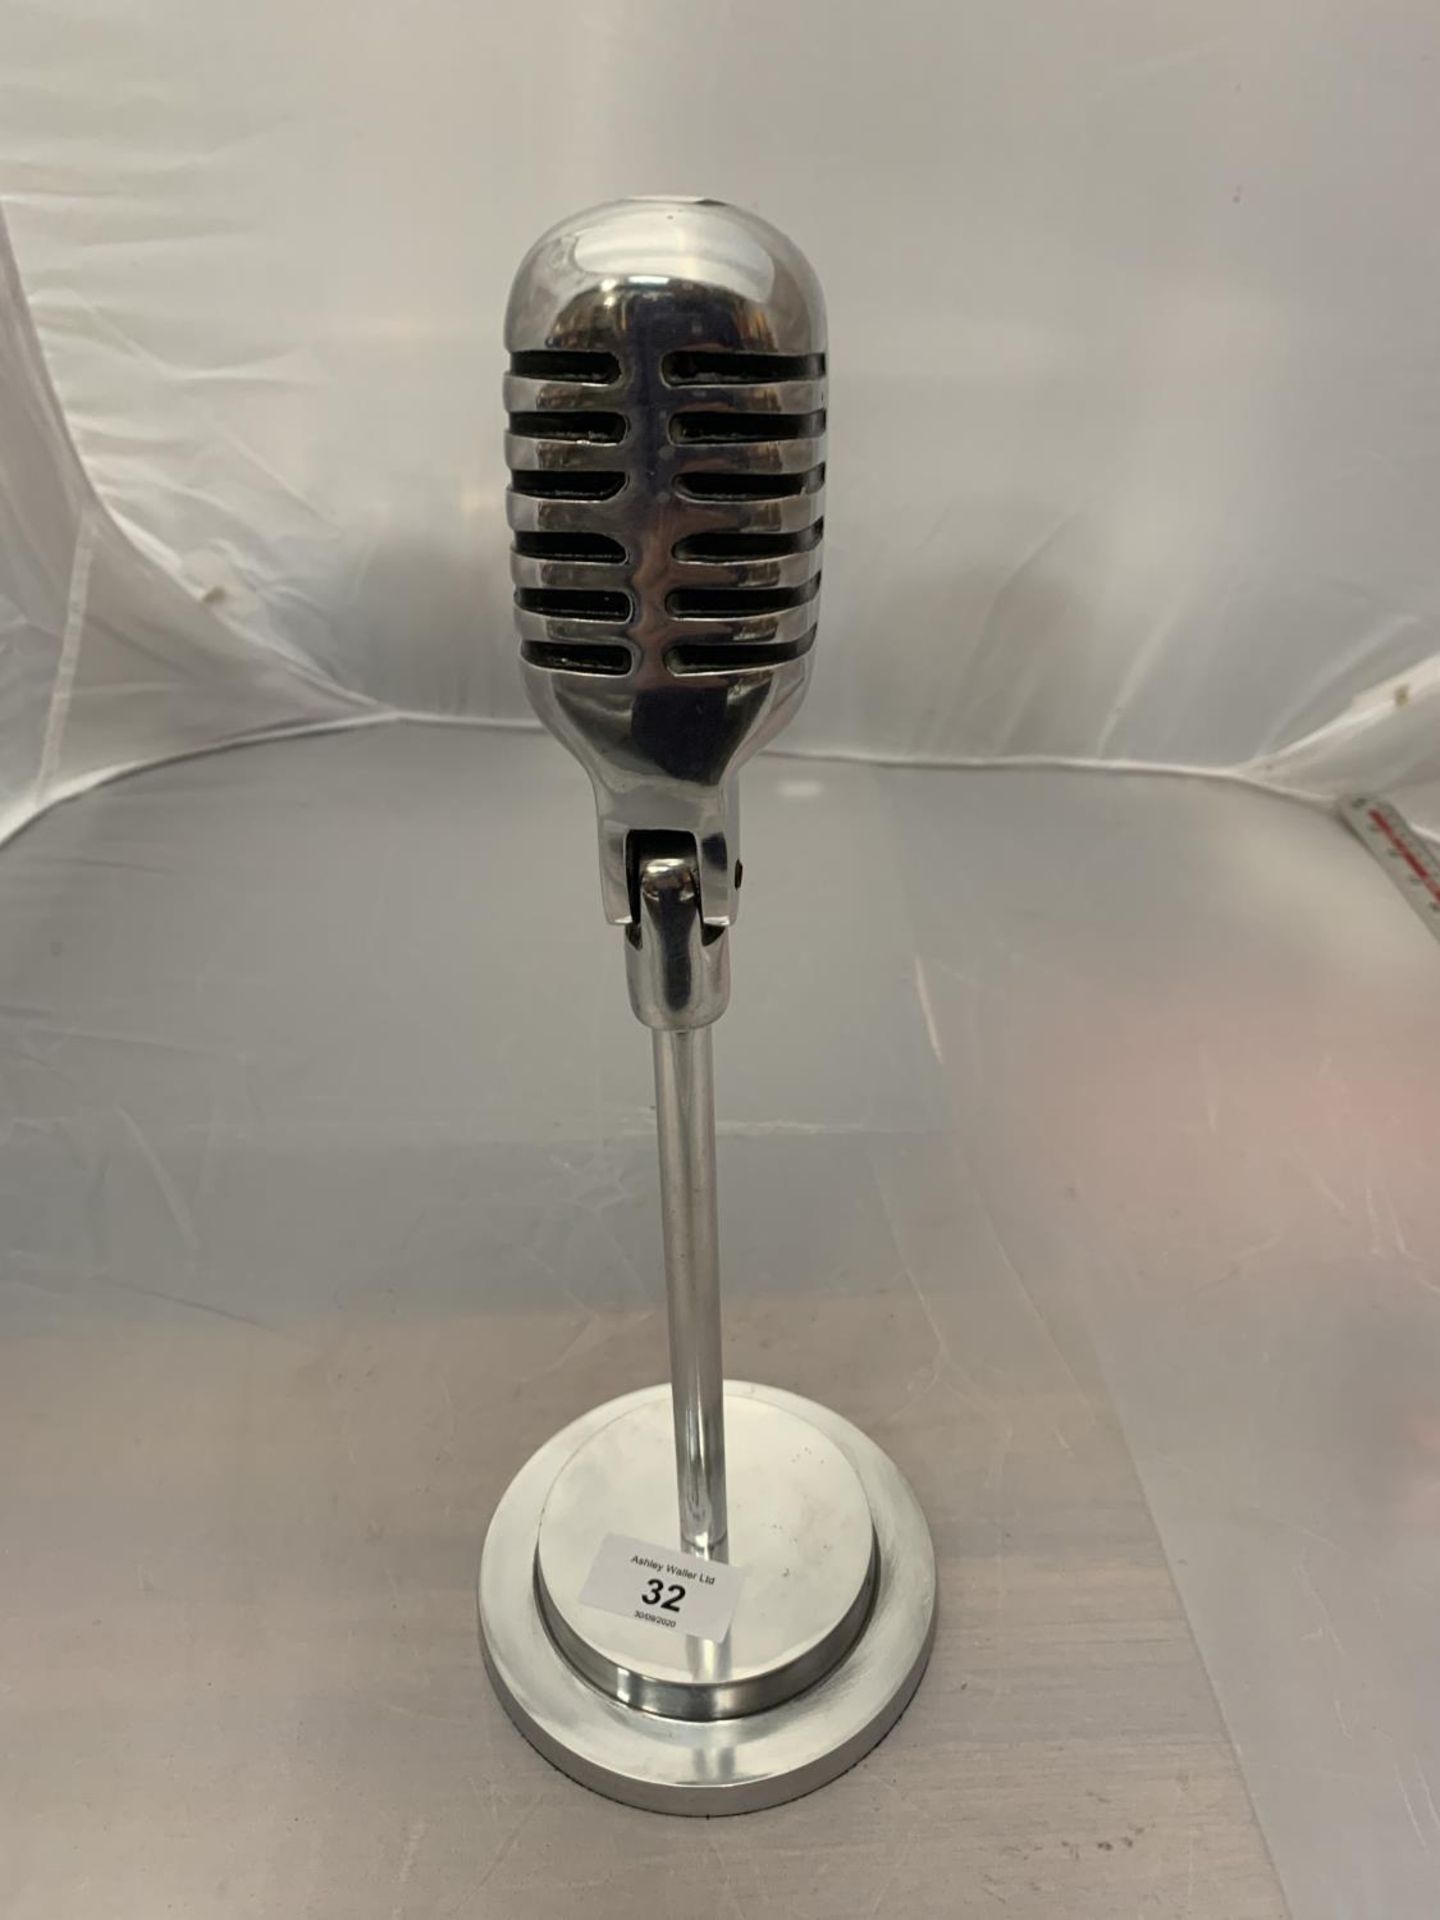 A CHROME OLD FASHIONED STYLE MICROPHONE - Image 3 of 4